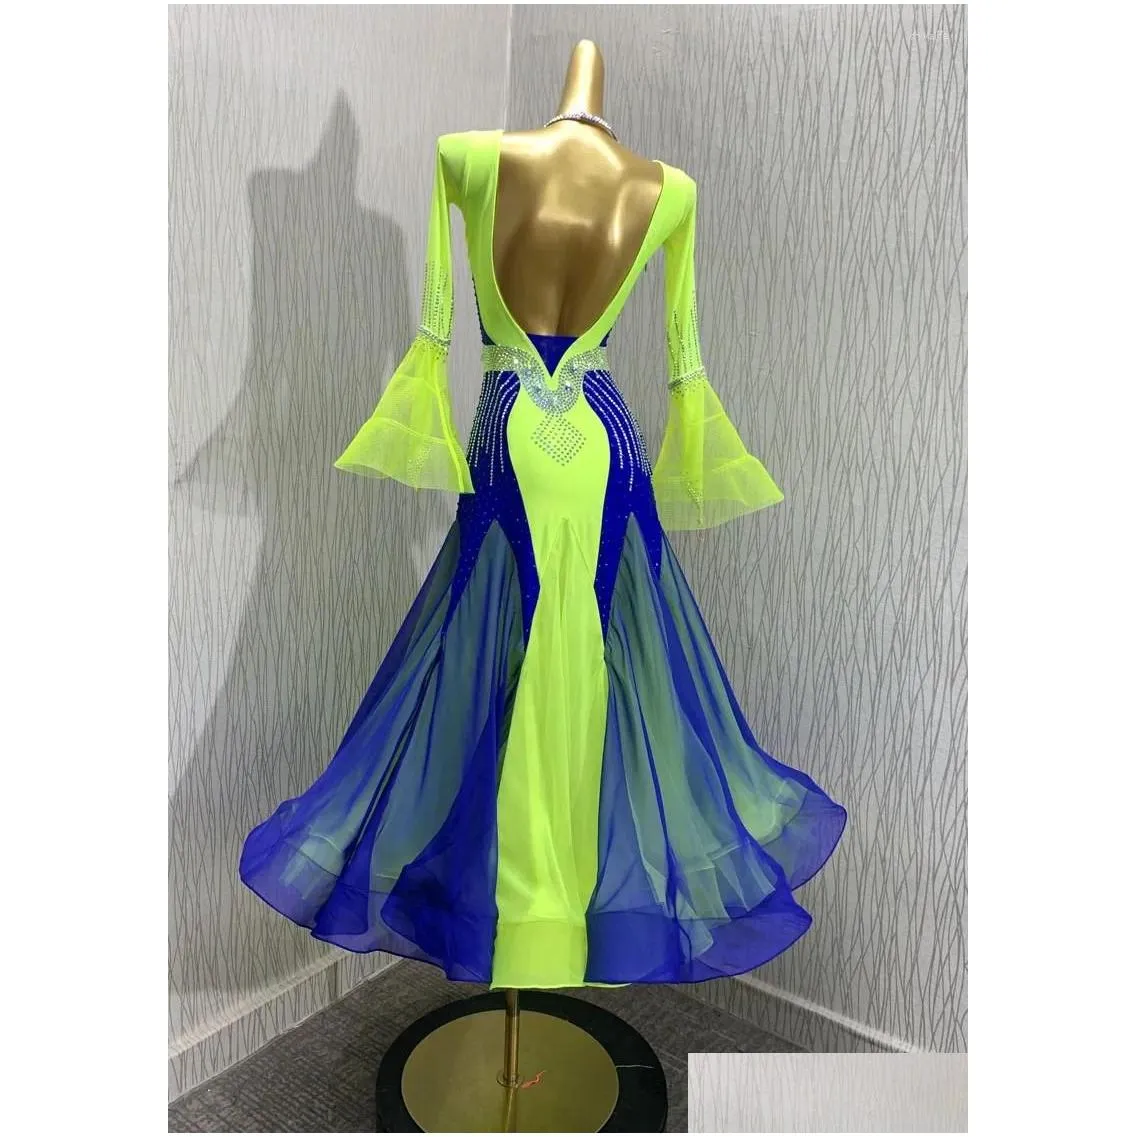 Stage Wear ABCDance Dress Modern Waltz Tango Competition Ballroom Dance Smooth Costume Long Sleeve Green